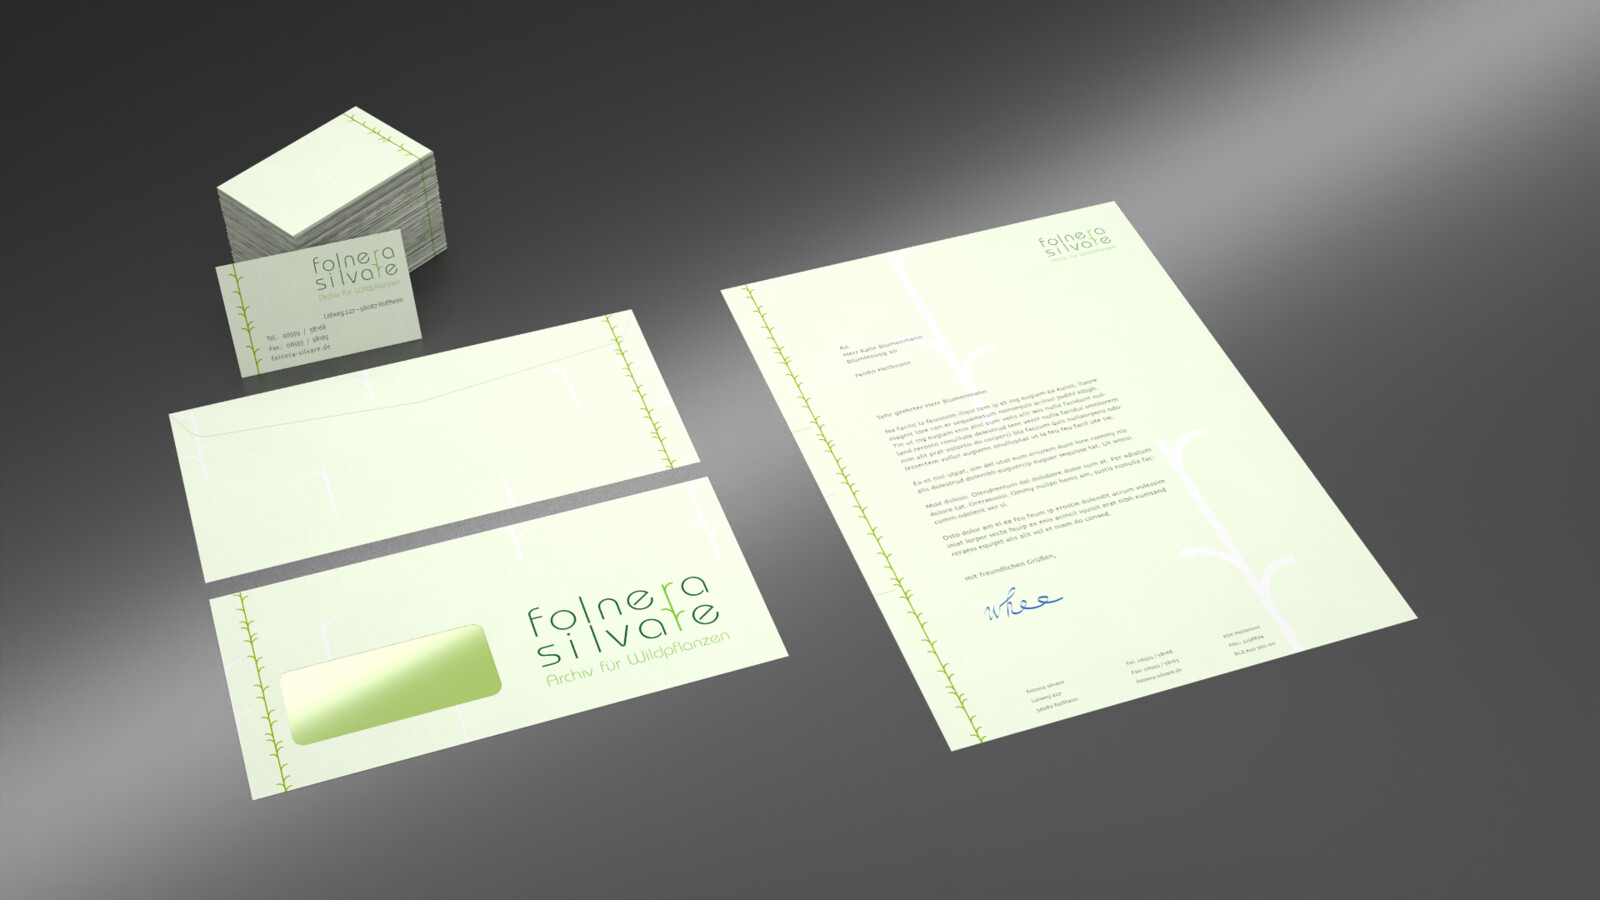 Letter, envelope and business card layouts